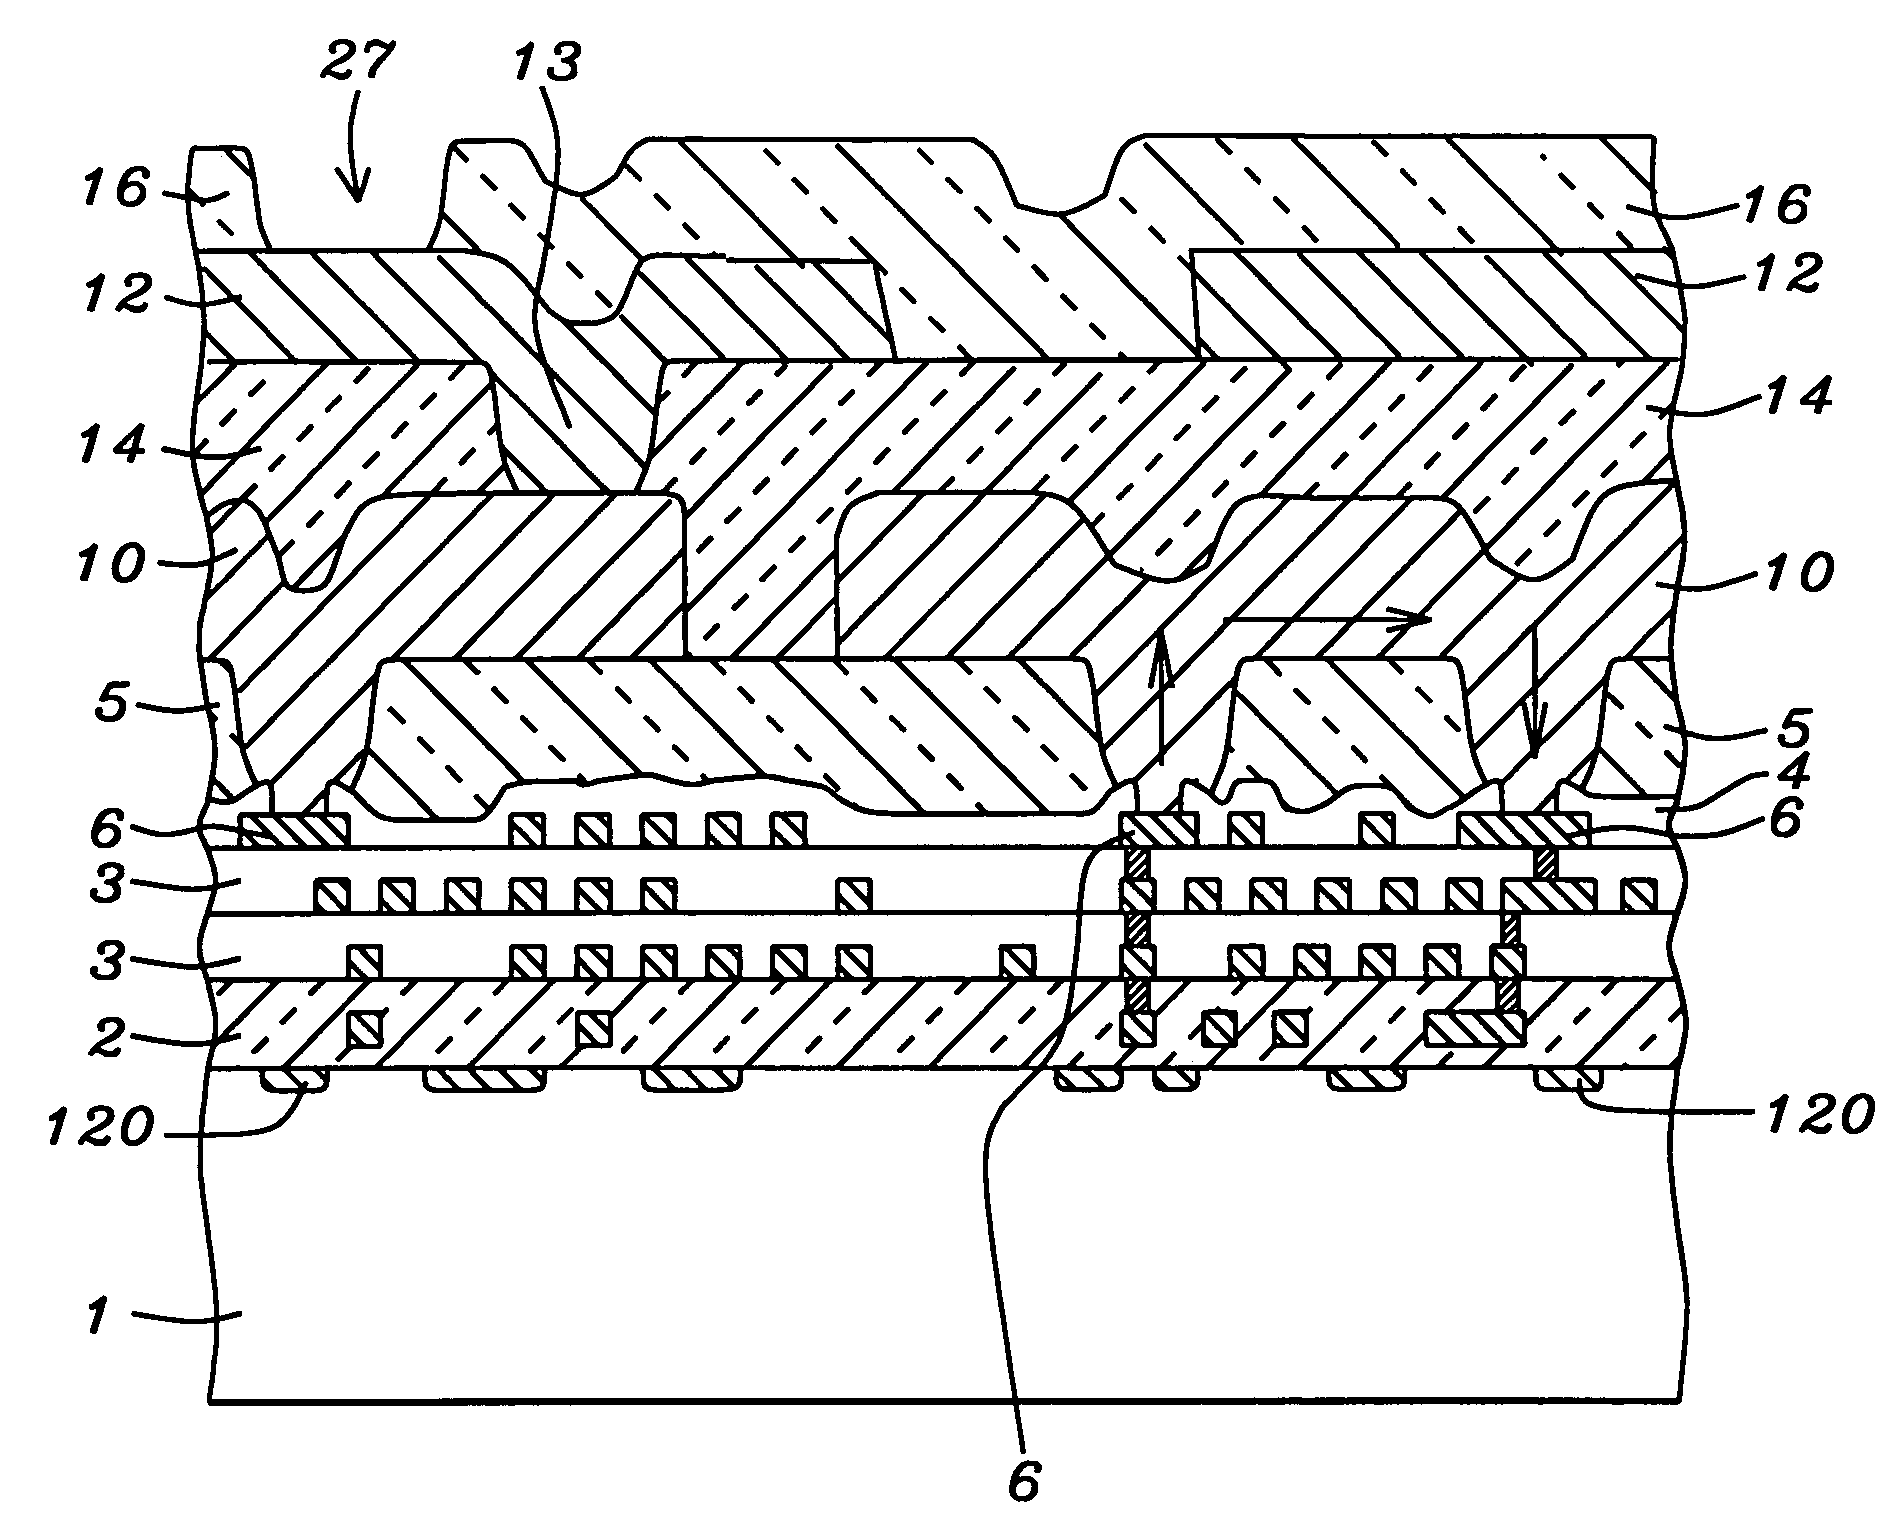 Top layers of metal for integrated circuits